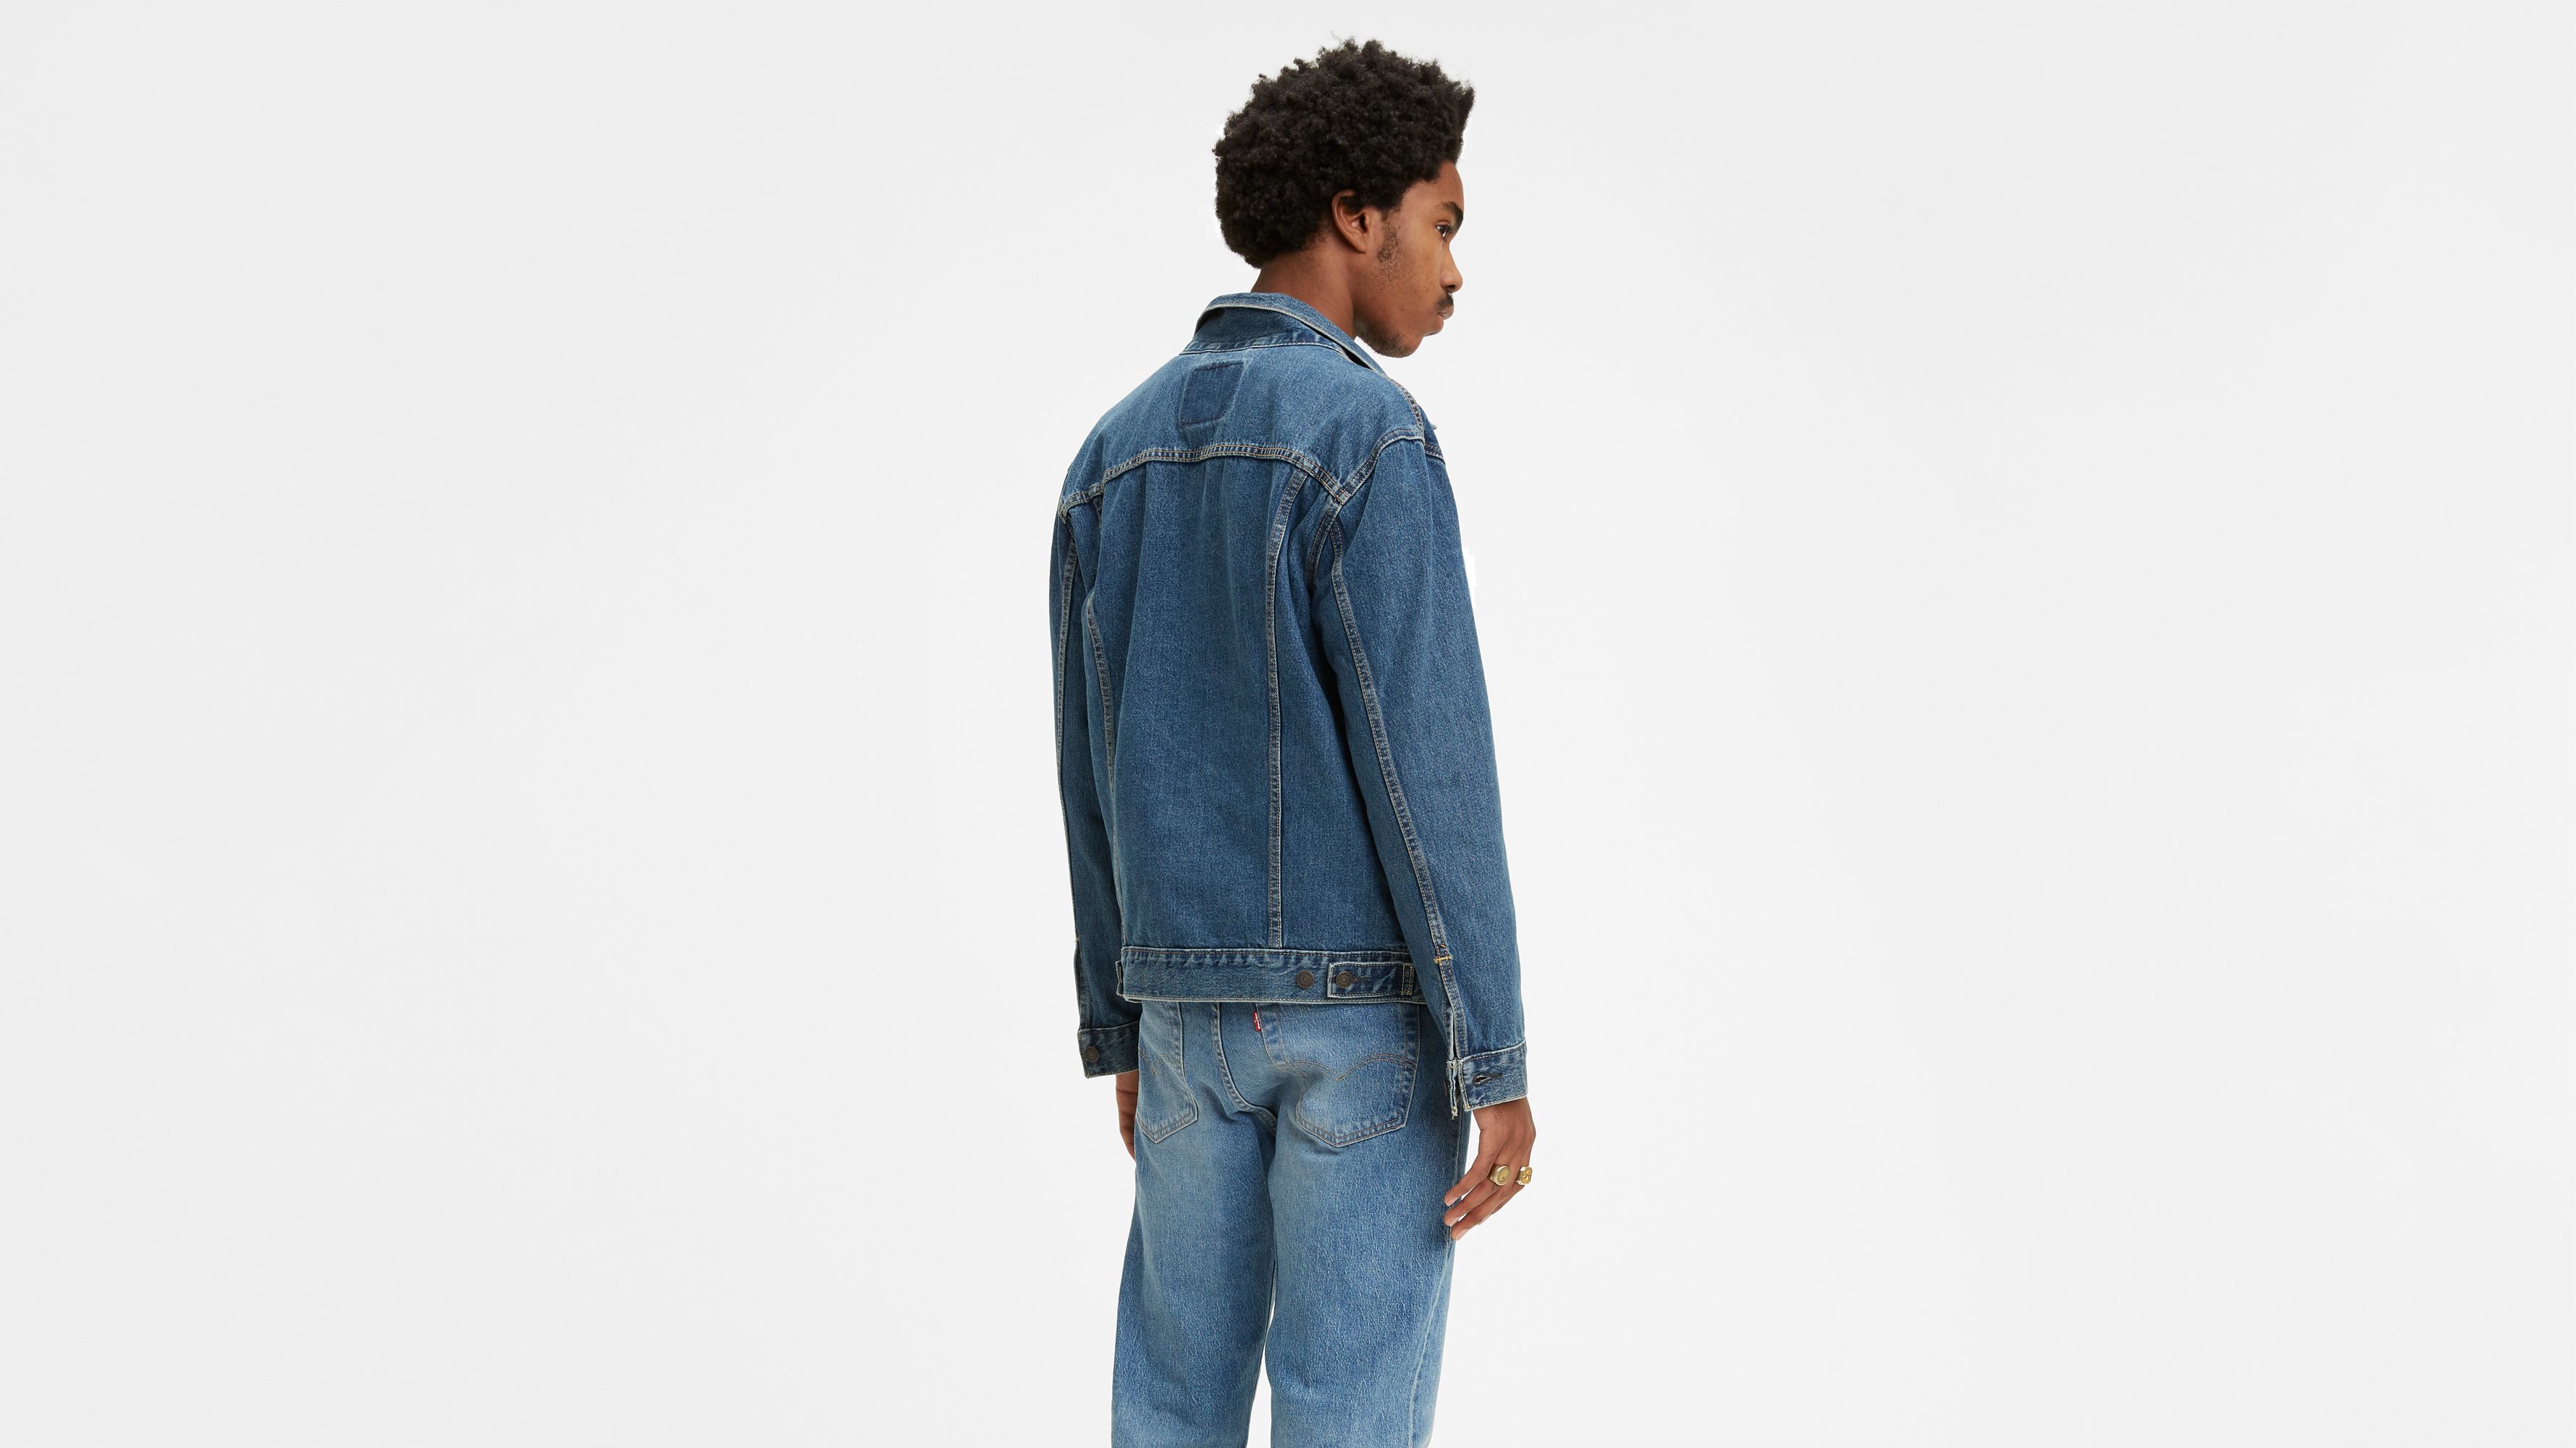 Buy Denim Jackets For Men At Lowest Prices Online In India | Tata CLiQ